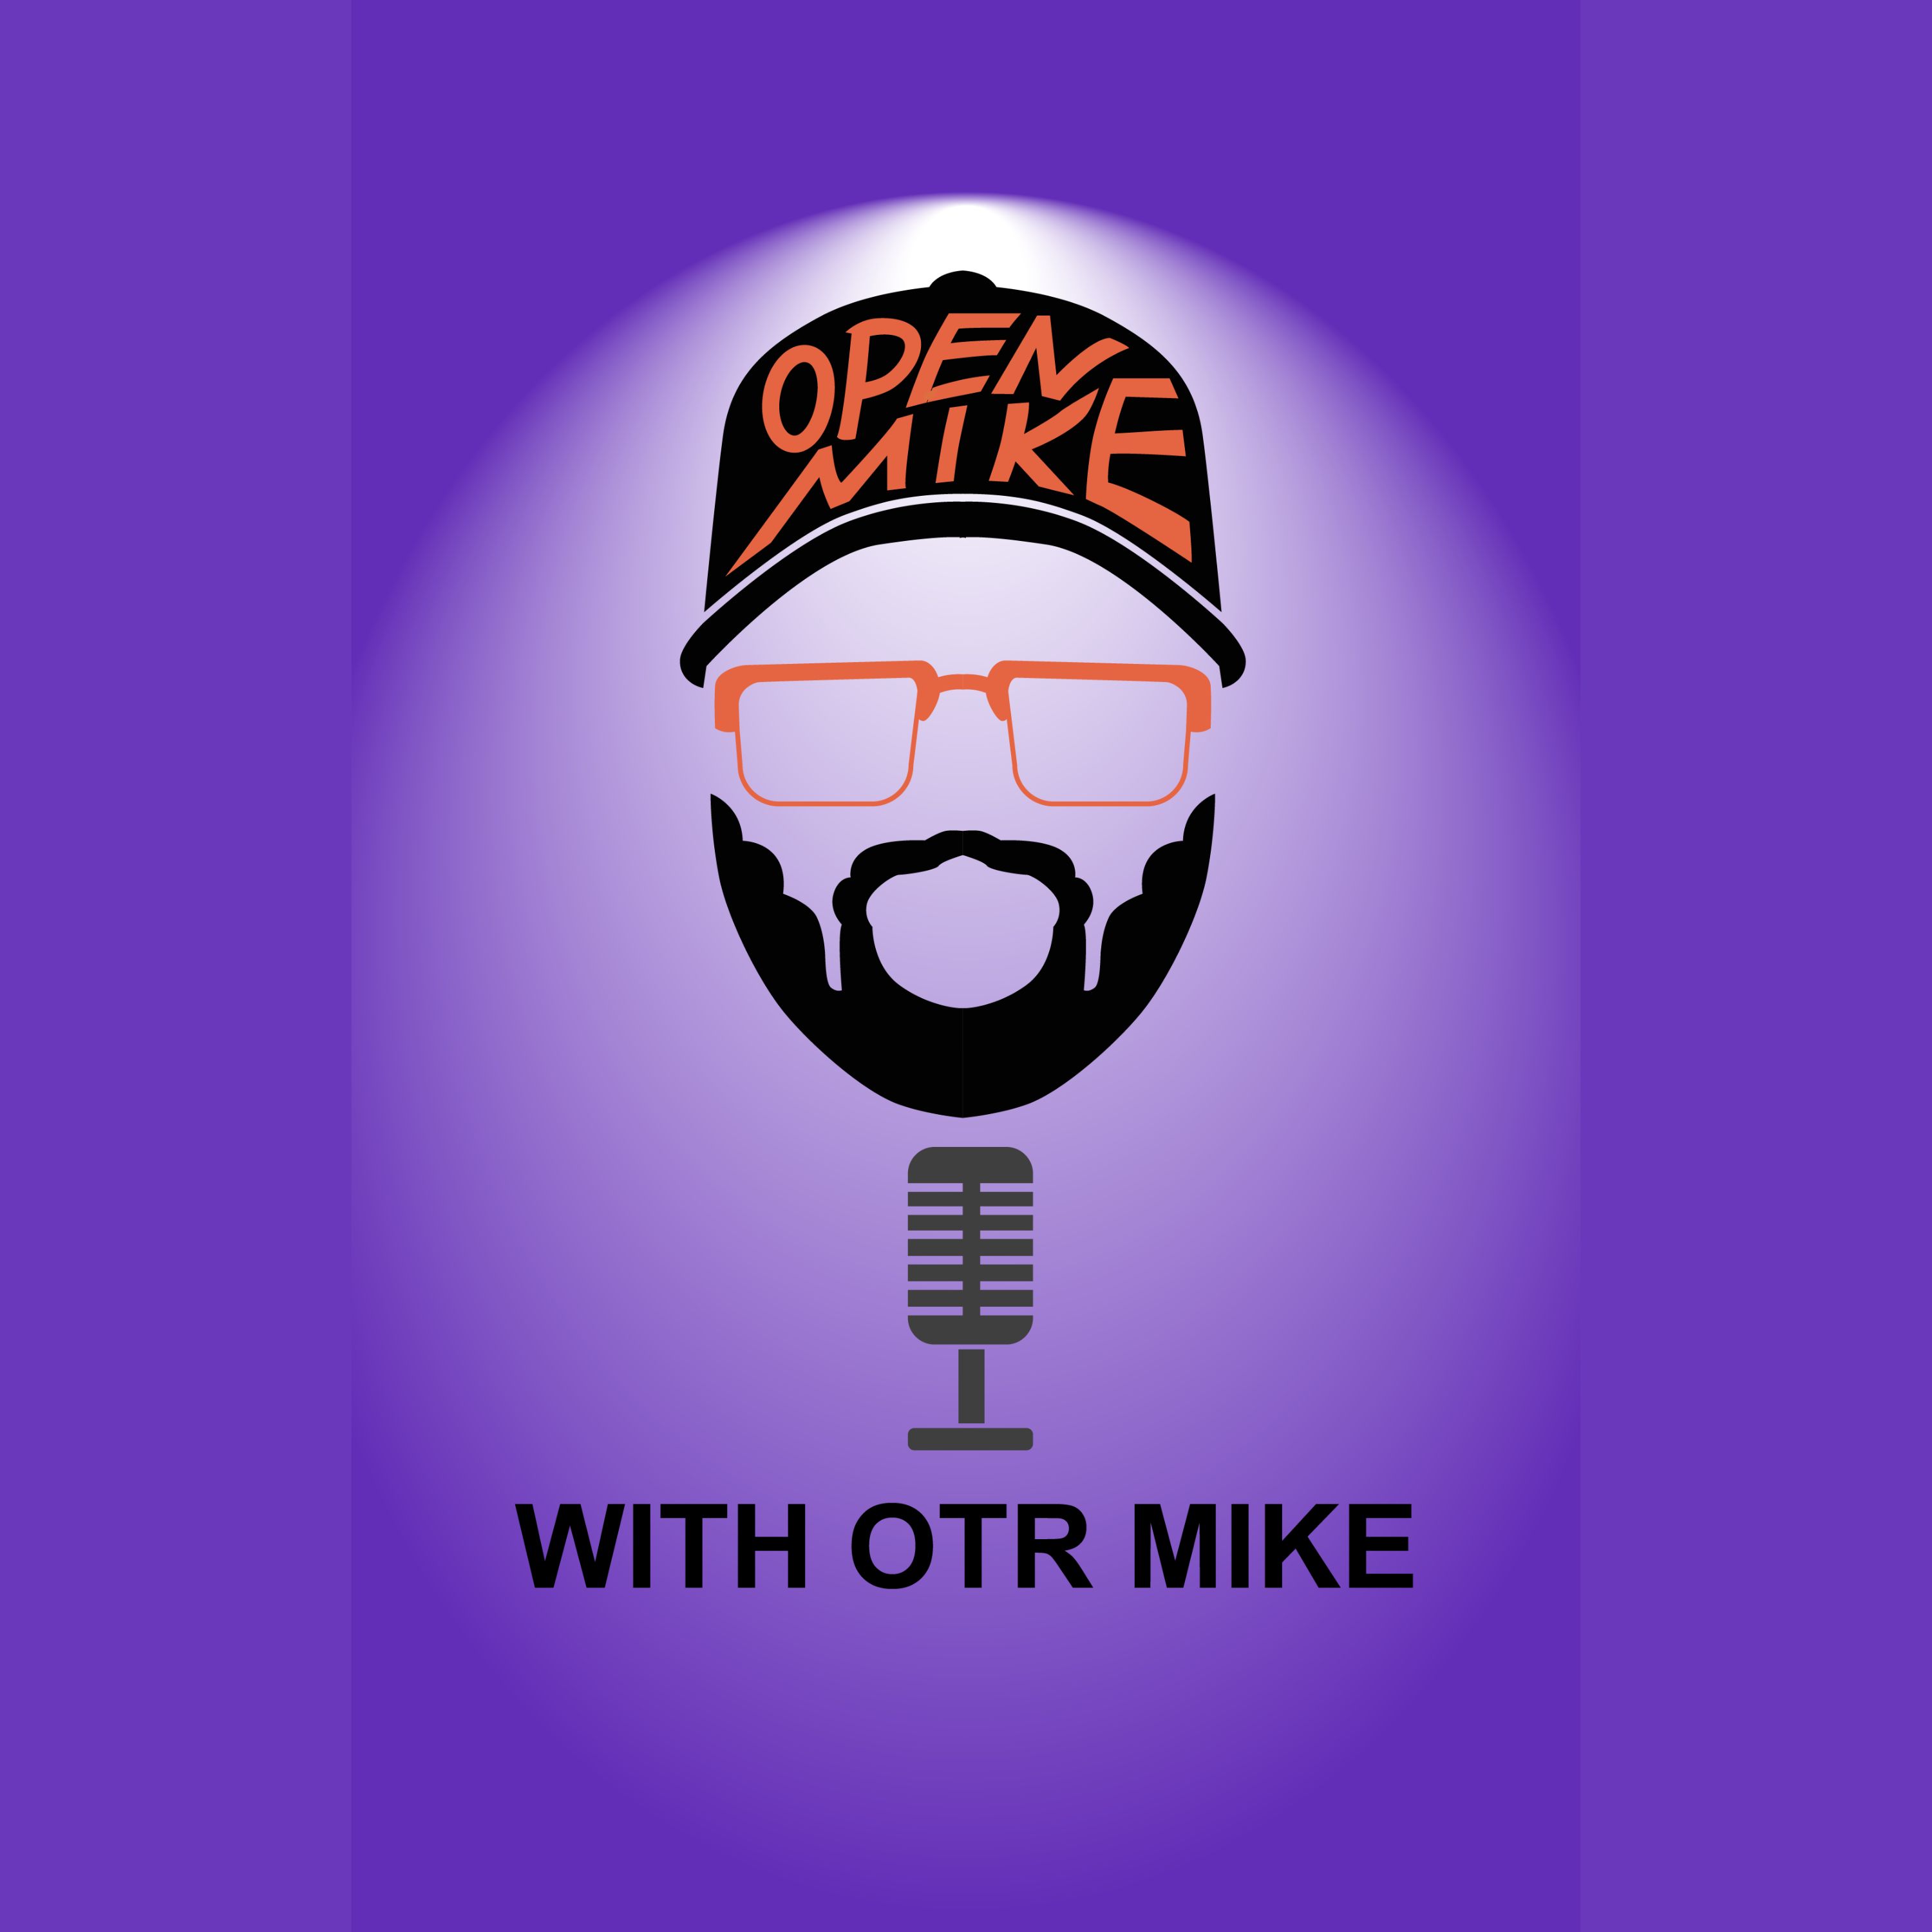 Artwork for Open Mike with OTR Mike